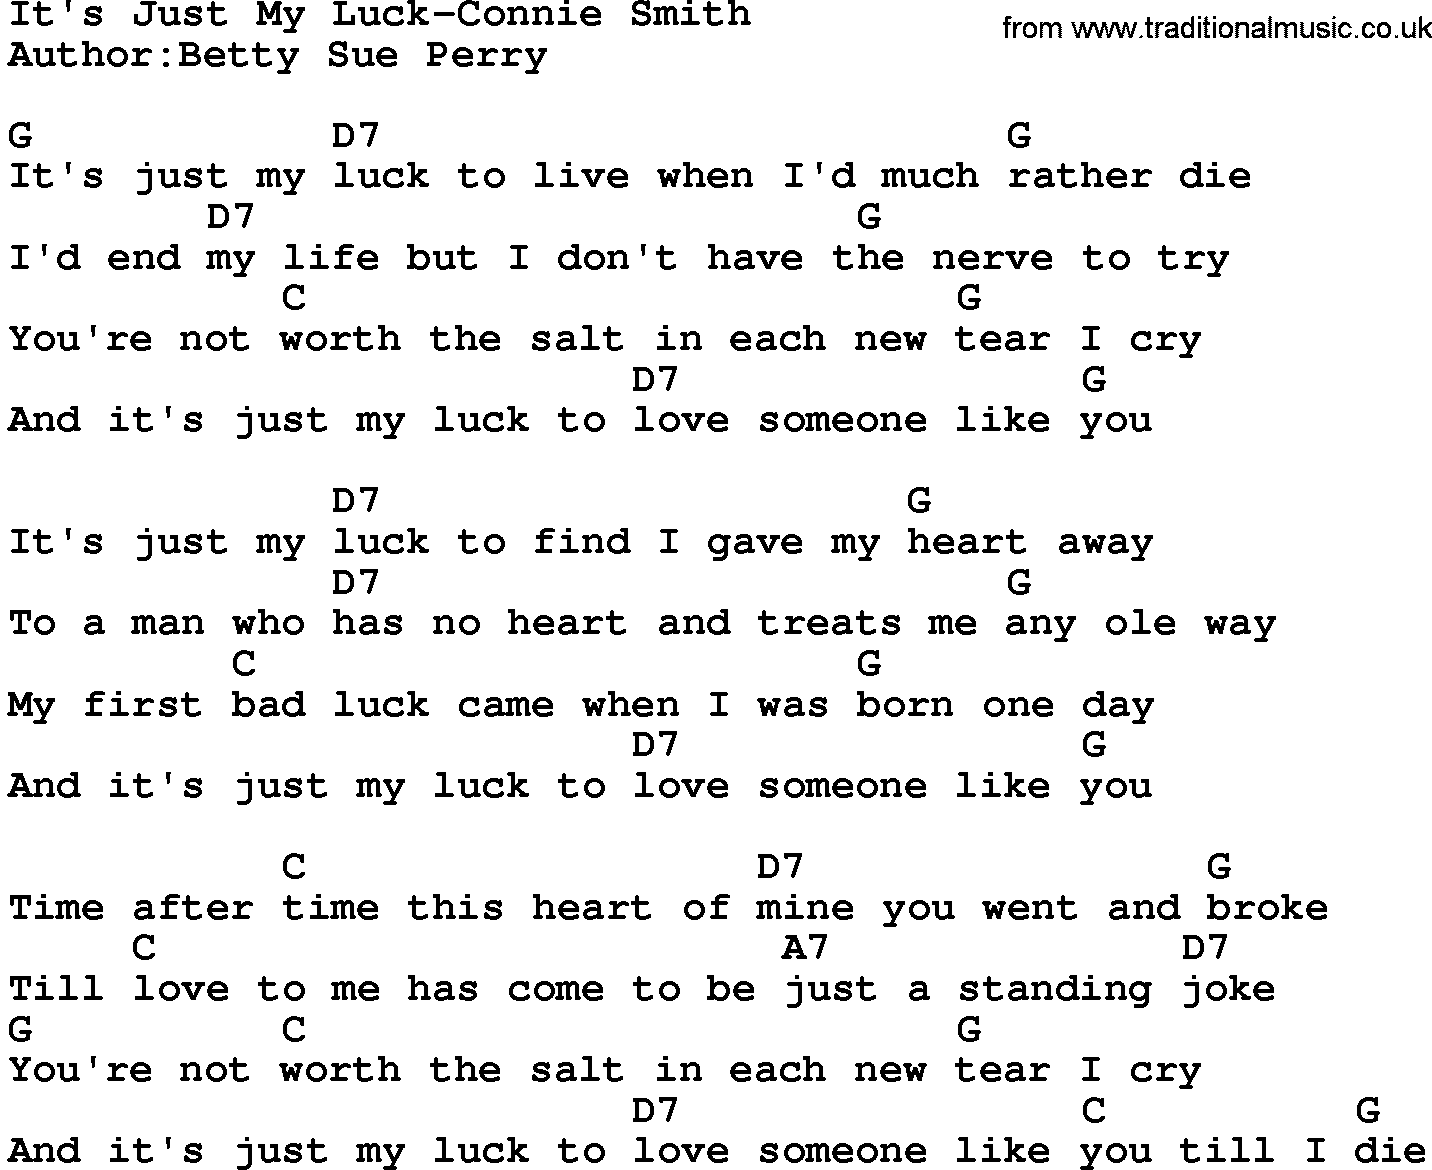 Country music song: It's Just My Luck-Connie Smith lyrics and chords